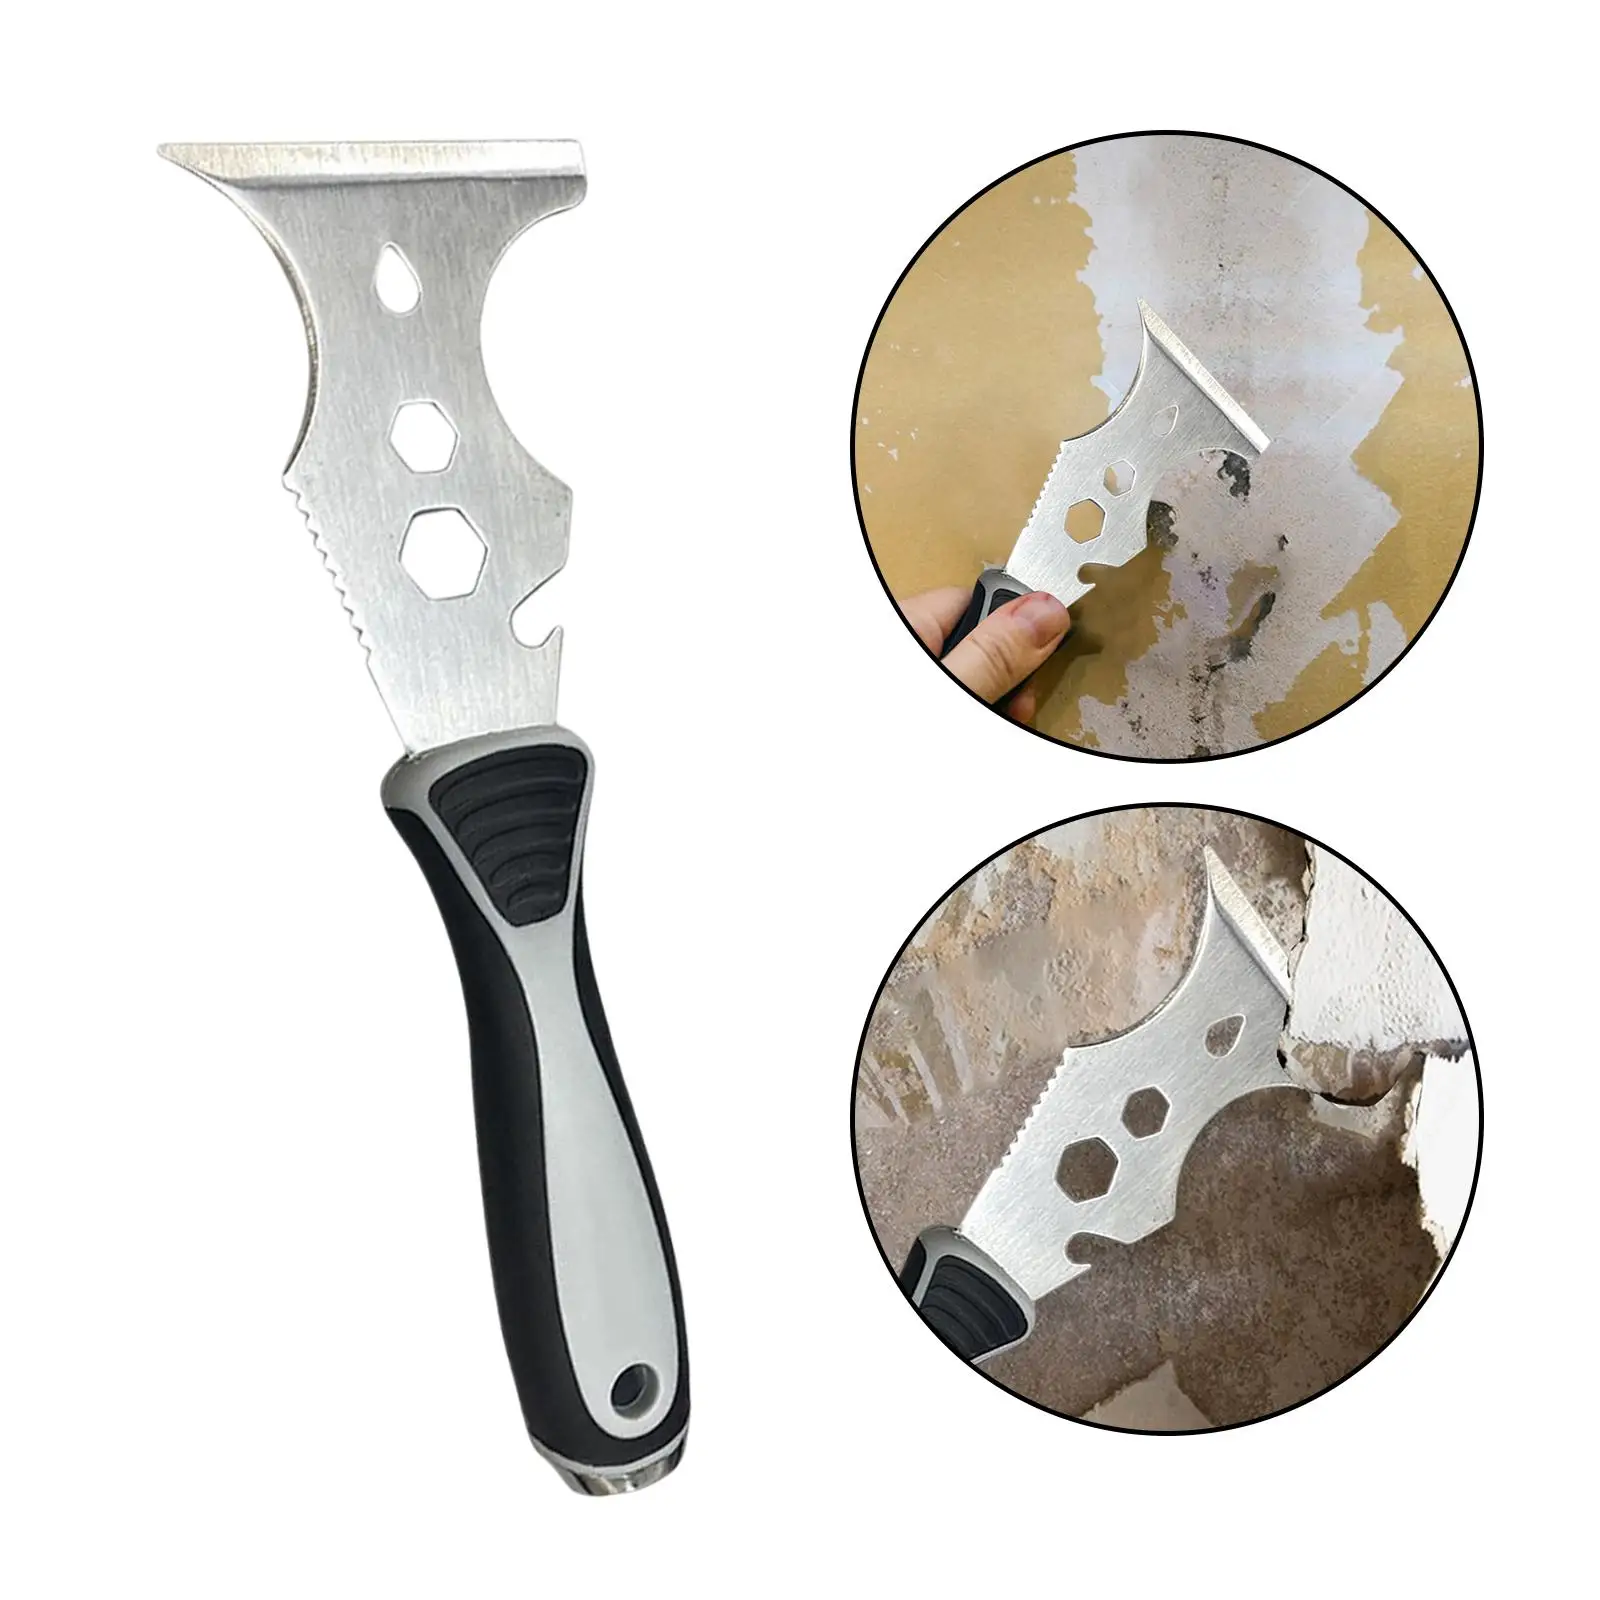 Multi Use Paint Scraper Removal Tool Painting Tools Professional Putty Knife for Repair